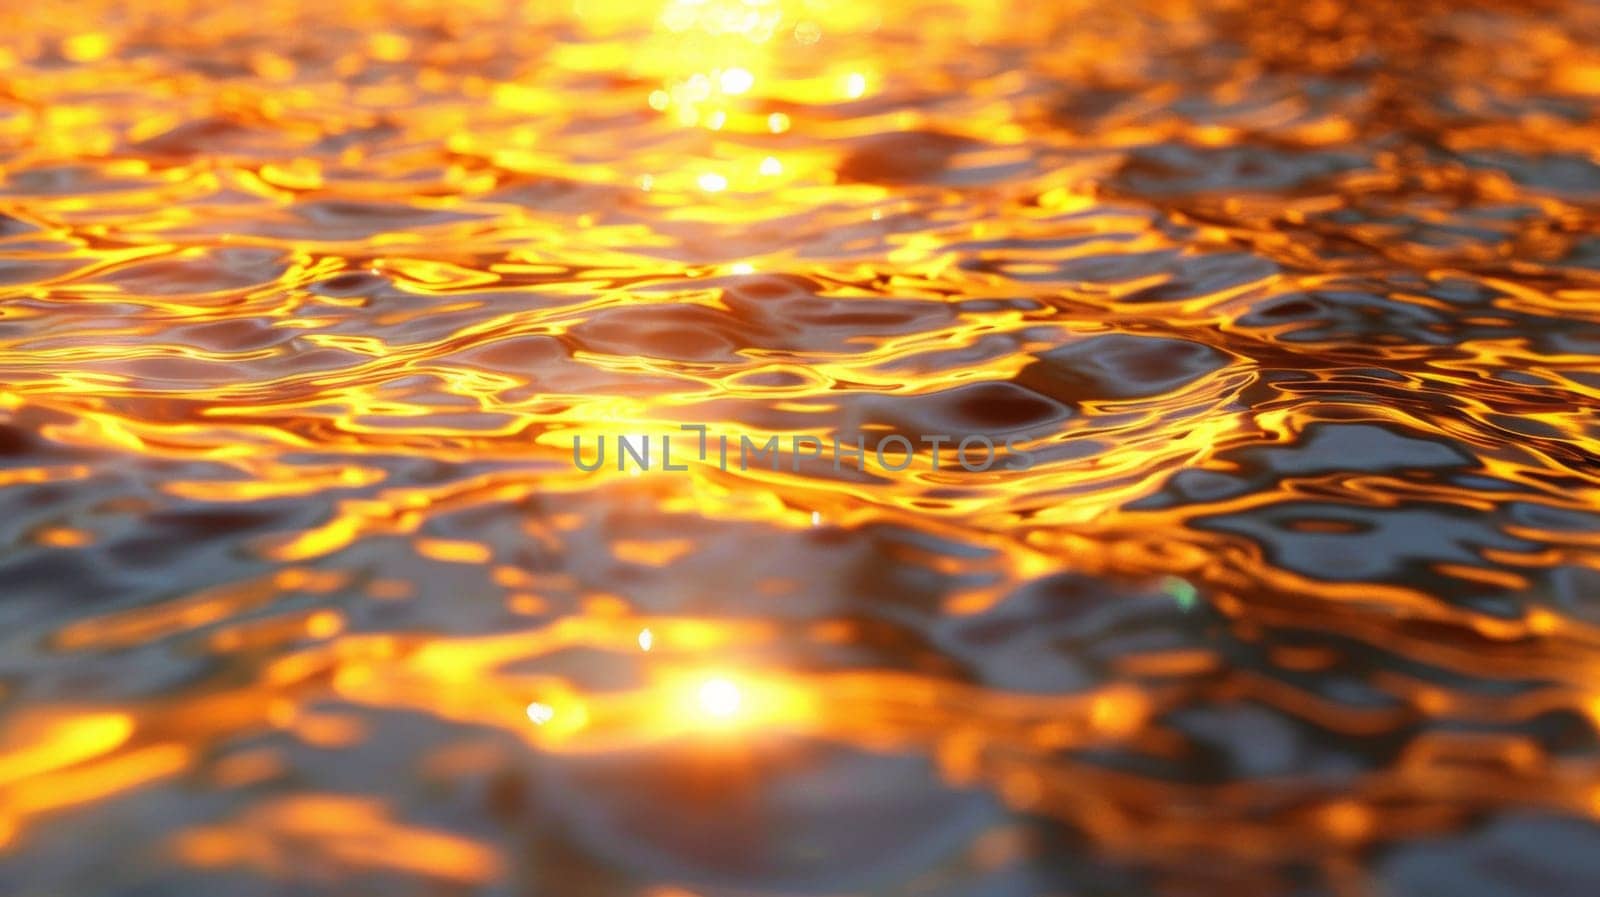 A close up of a water surface with some sun shining on it